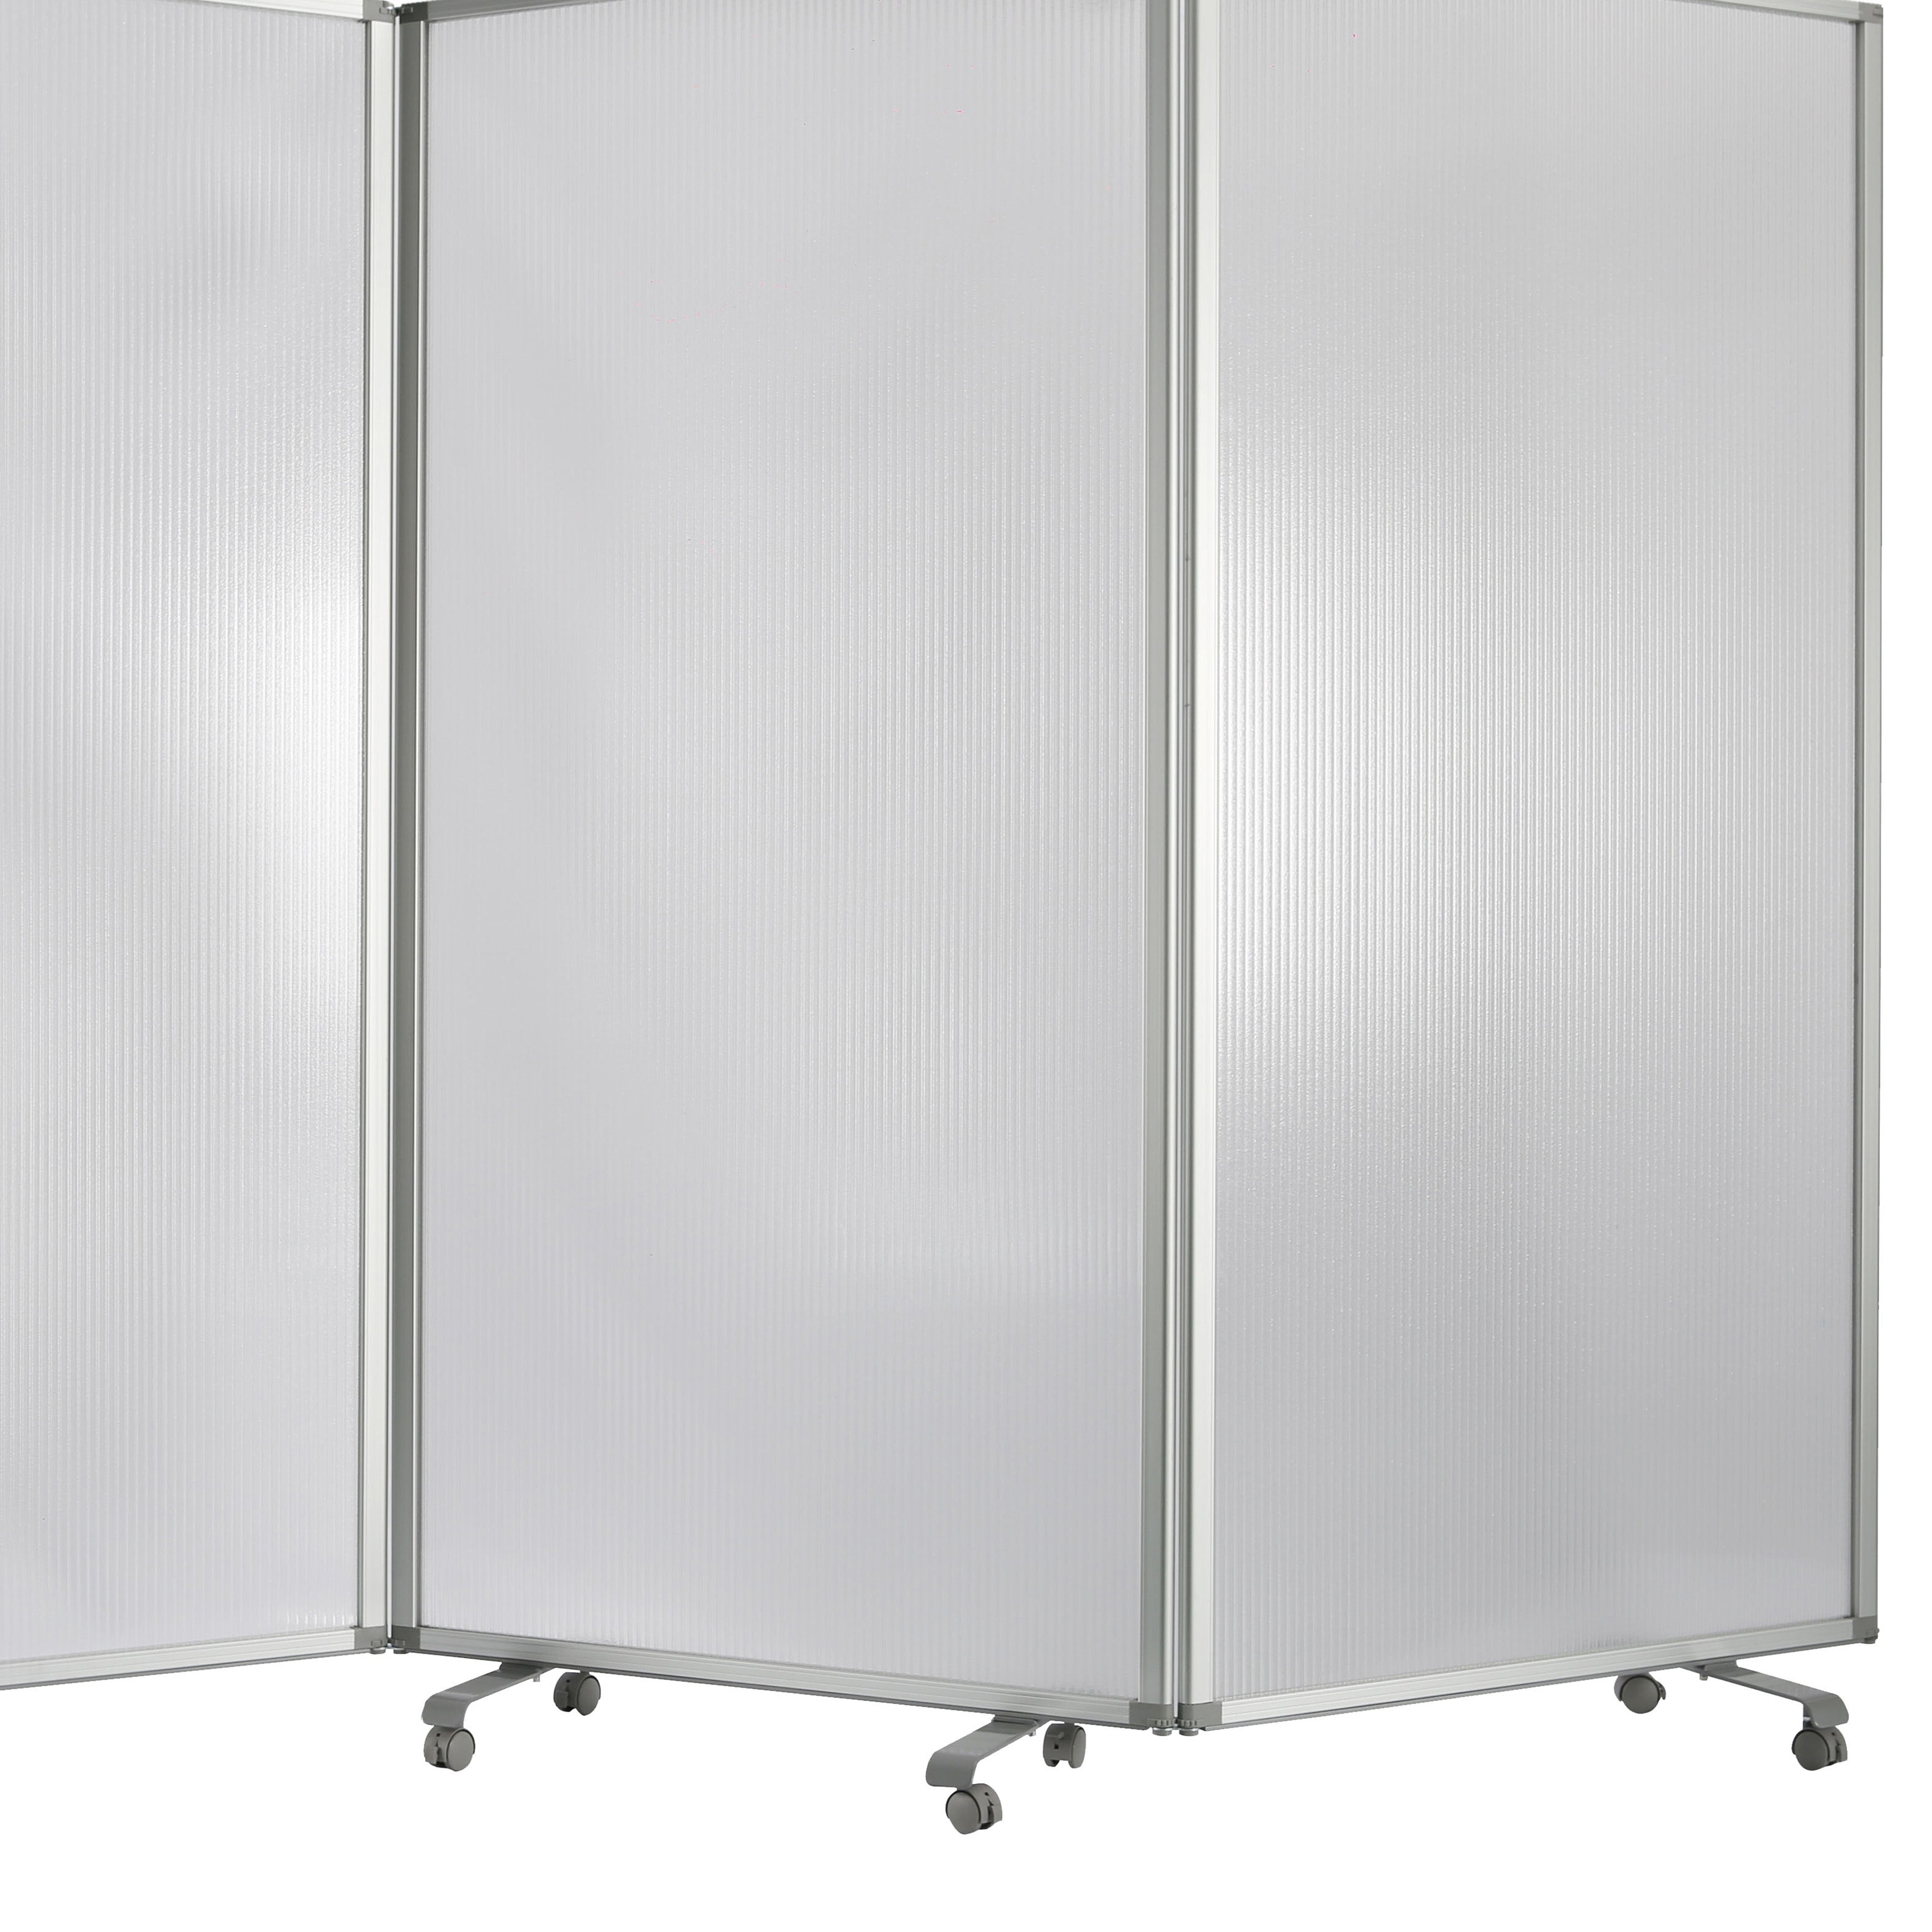 Benjara Accordion Style Plastic Inserts 3 Panel Room Divider with